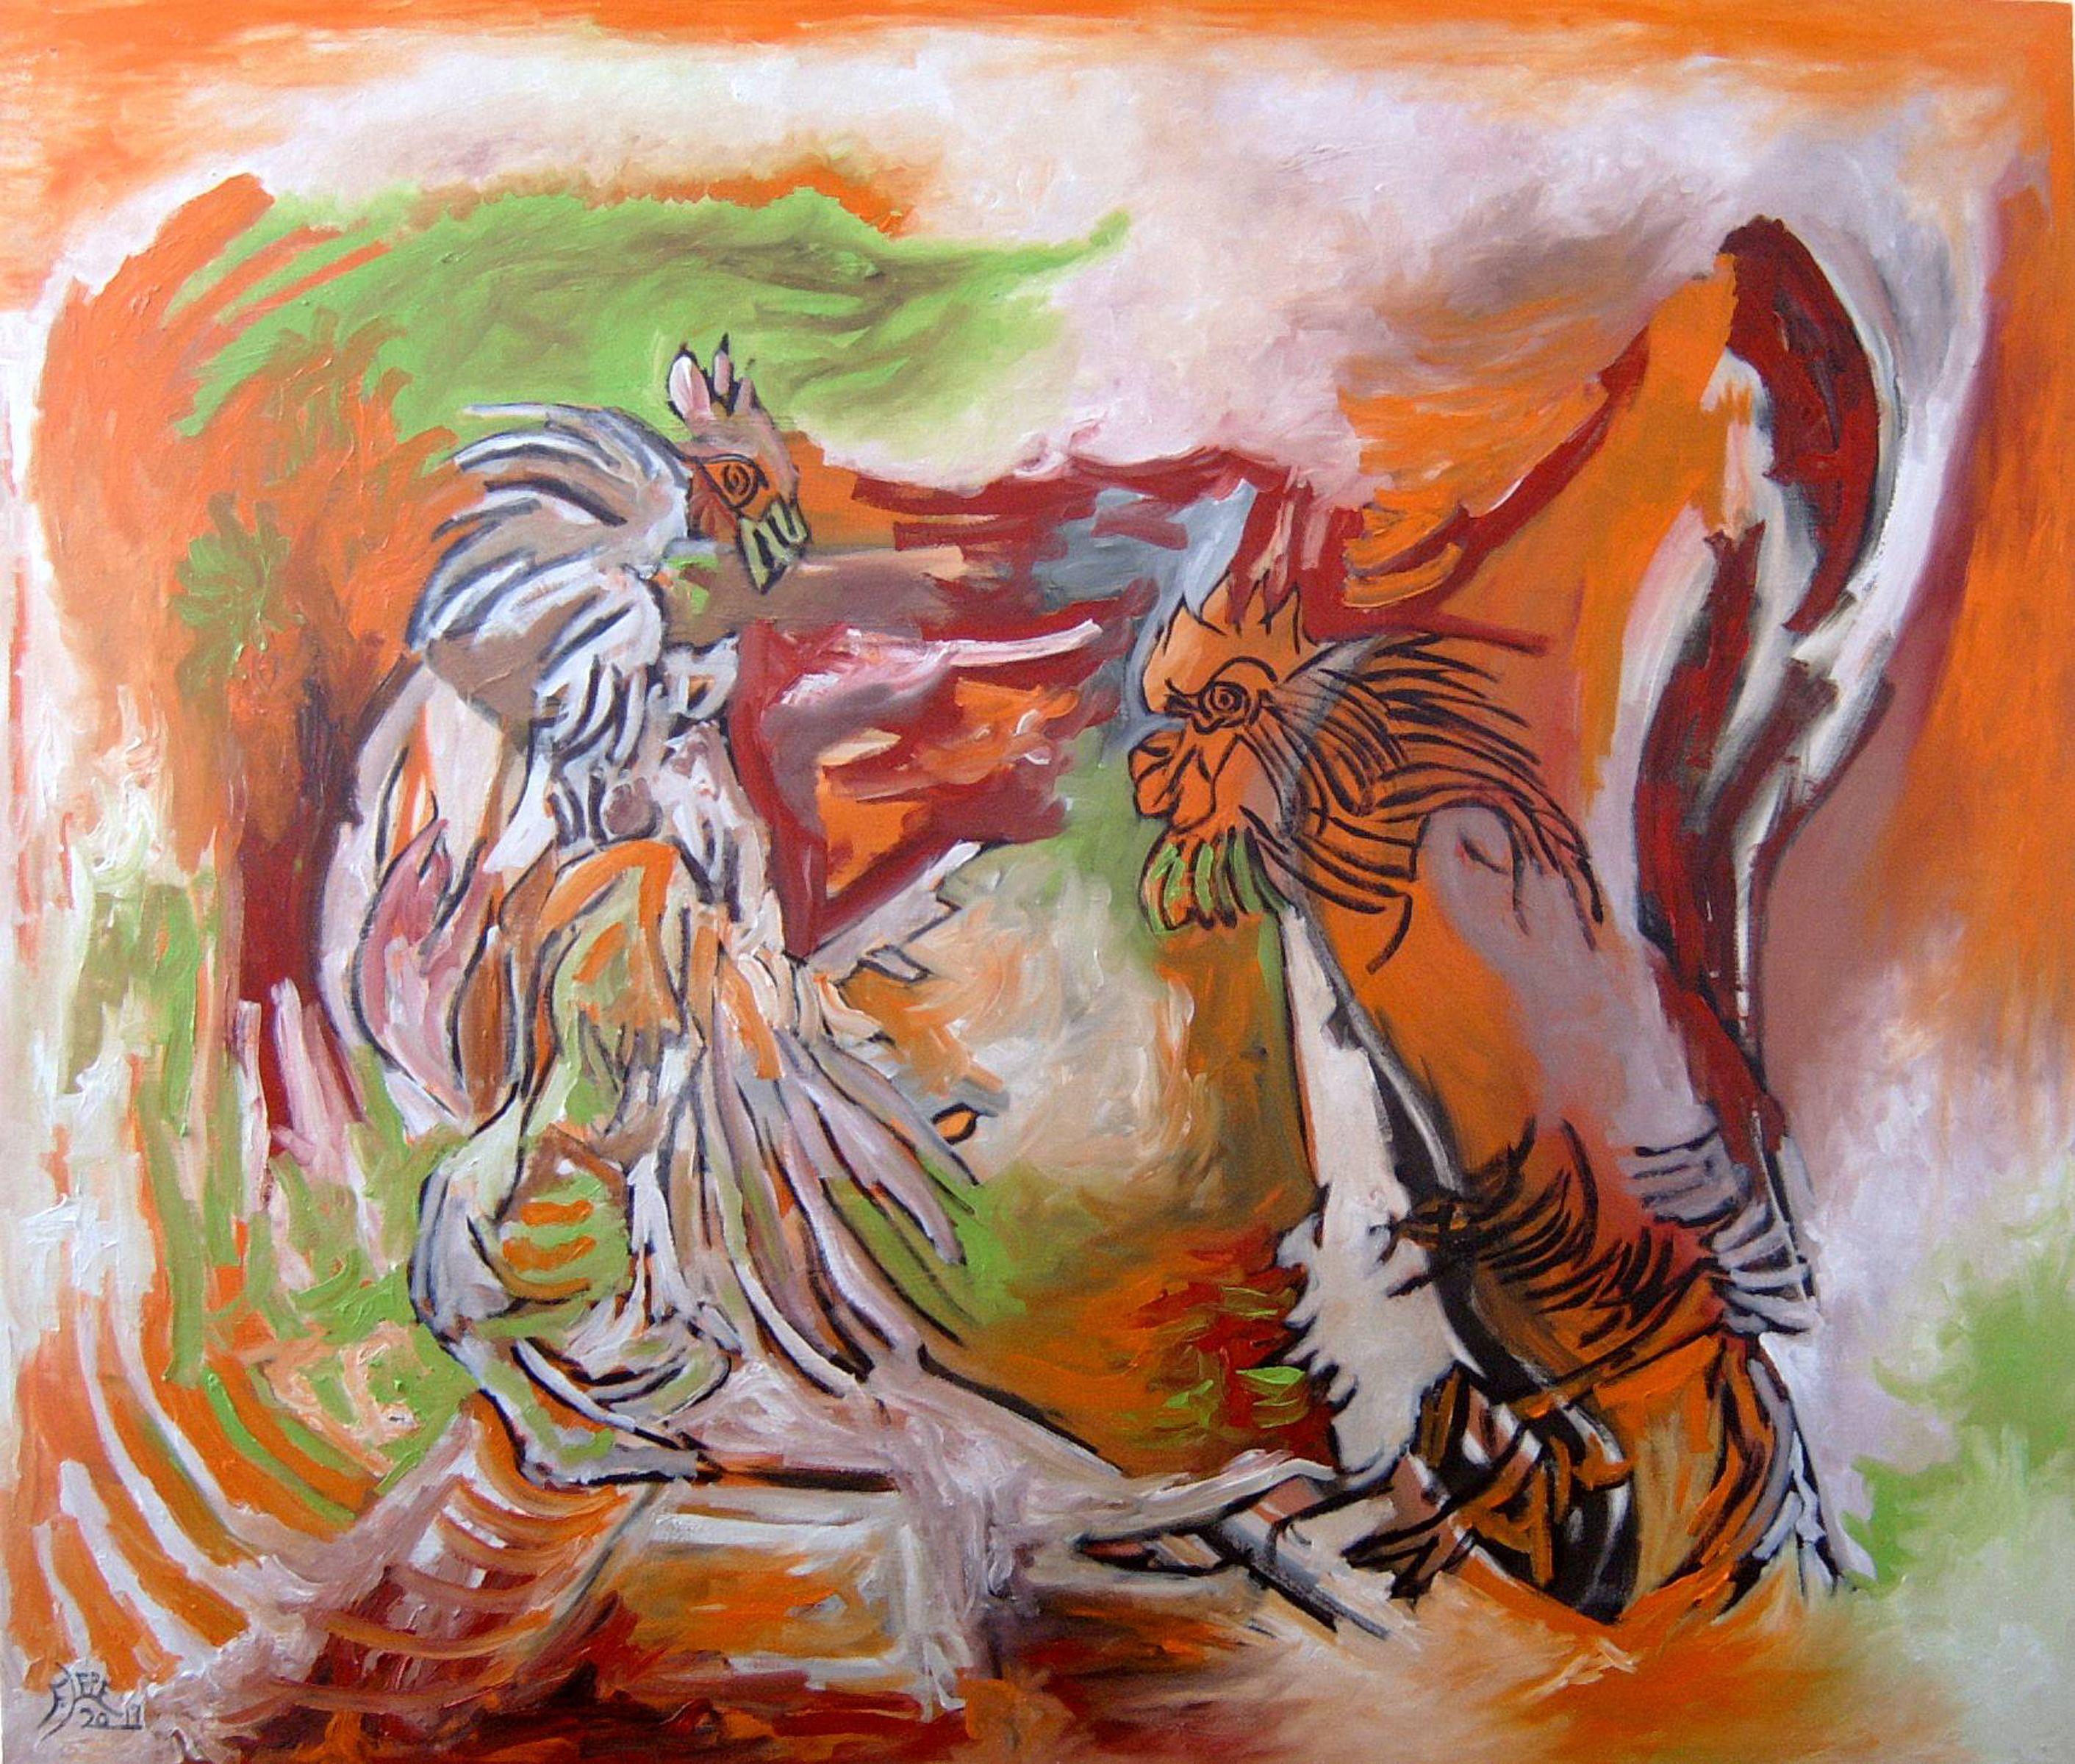 Federico Lepe Abstract Painting - "ROOSTERS #2", Painting, Oil on Canvas